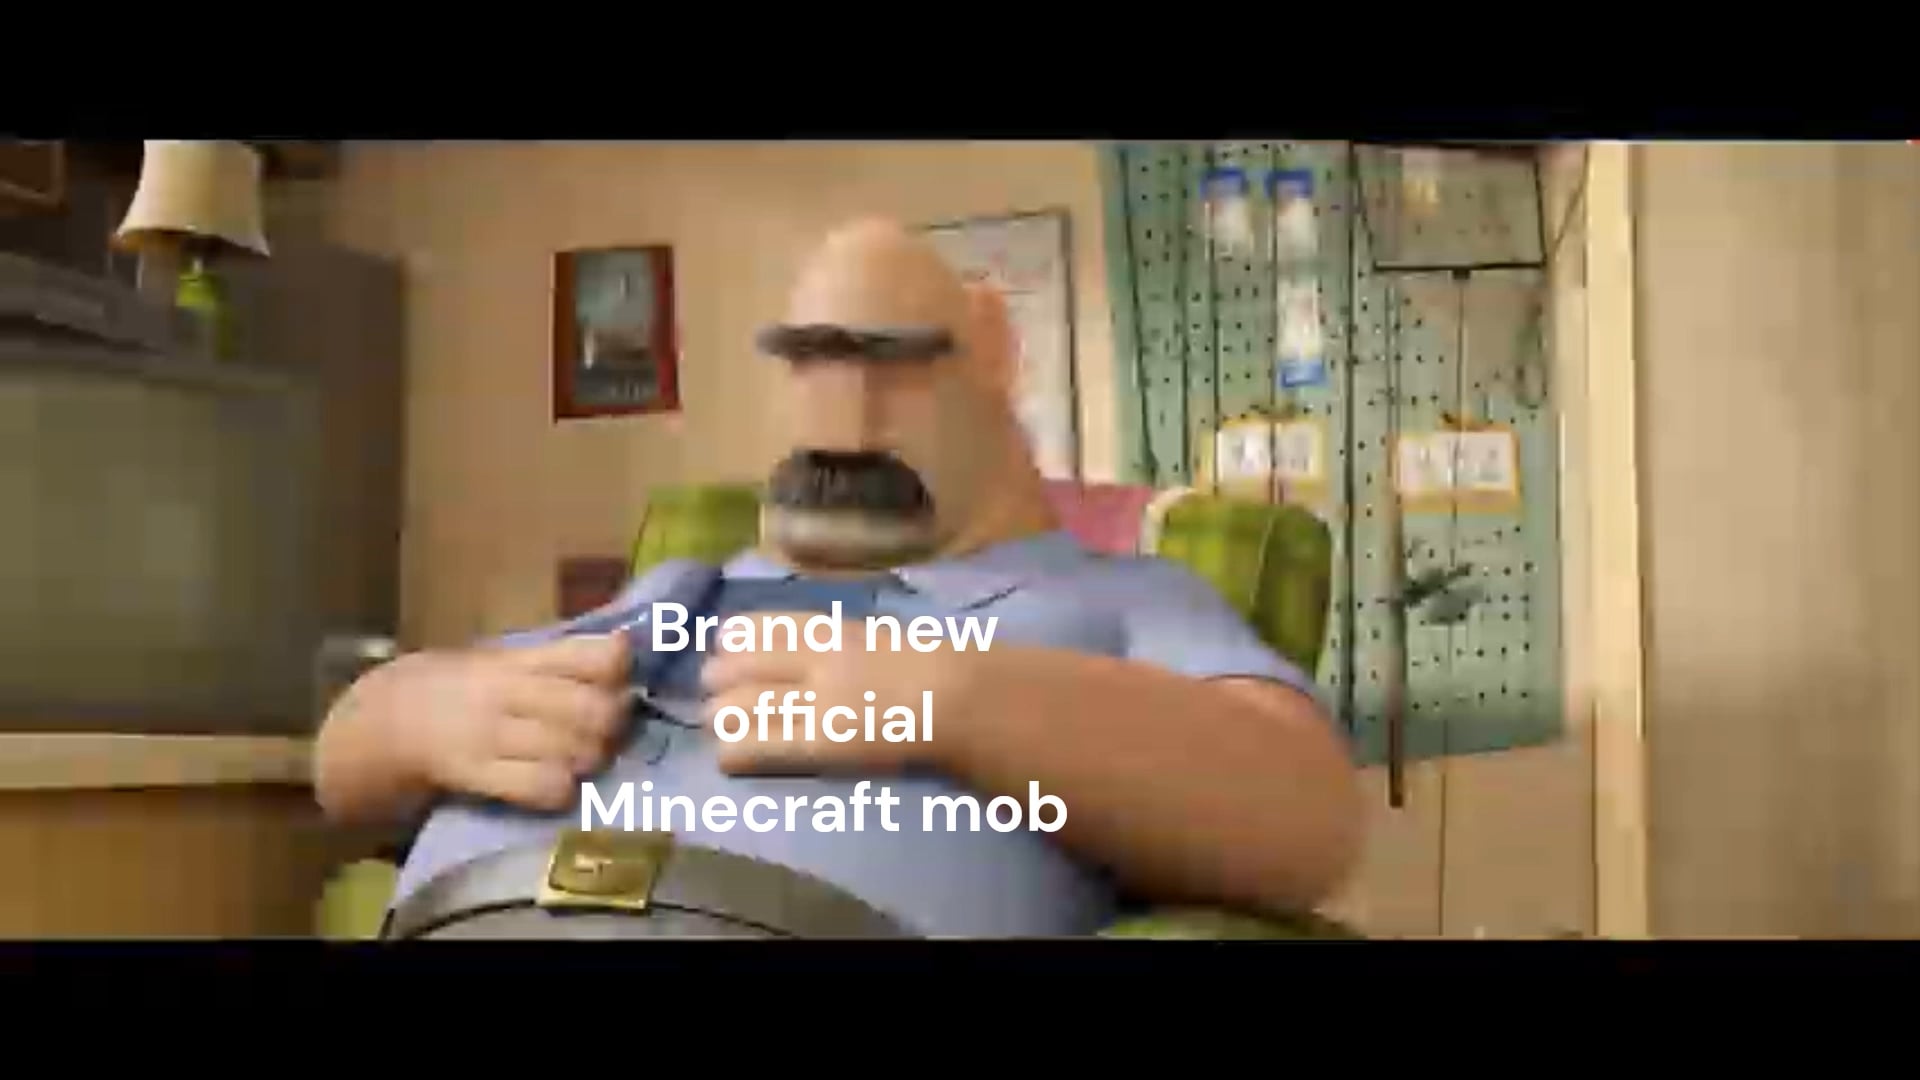 Minecraft Memes - I'm indeed sick of such manipulation and fake pretending to form such content!